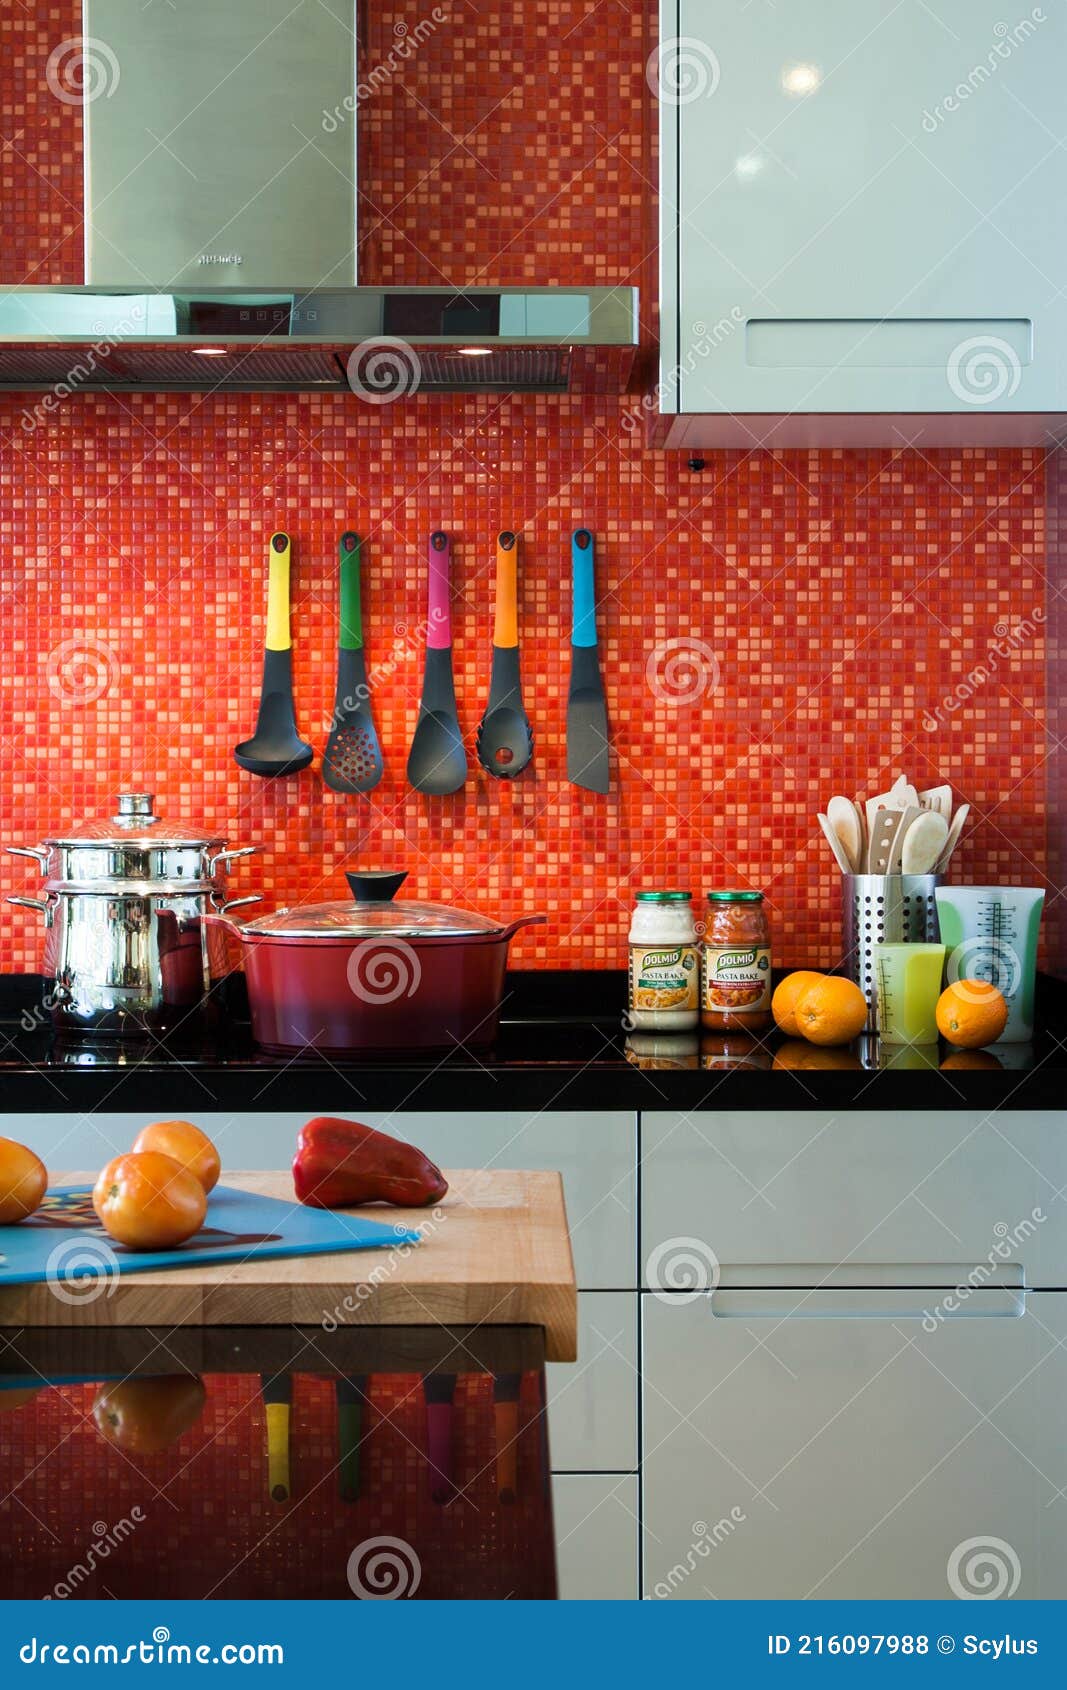 colorful kitchen with interesting red-tiled wall